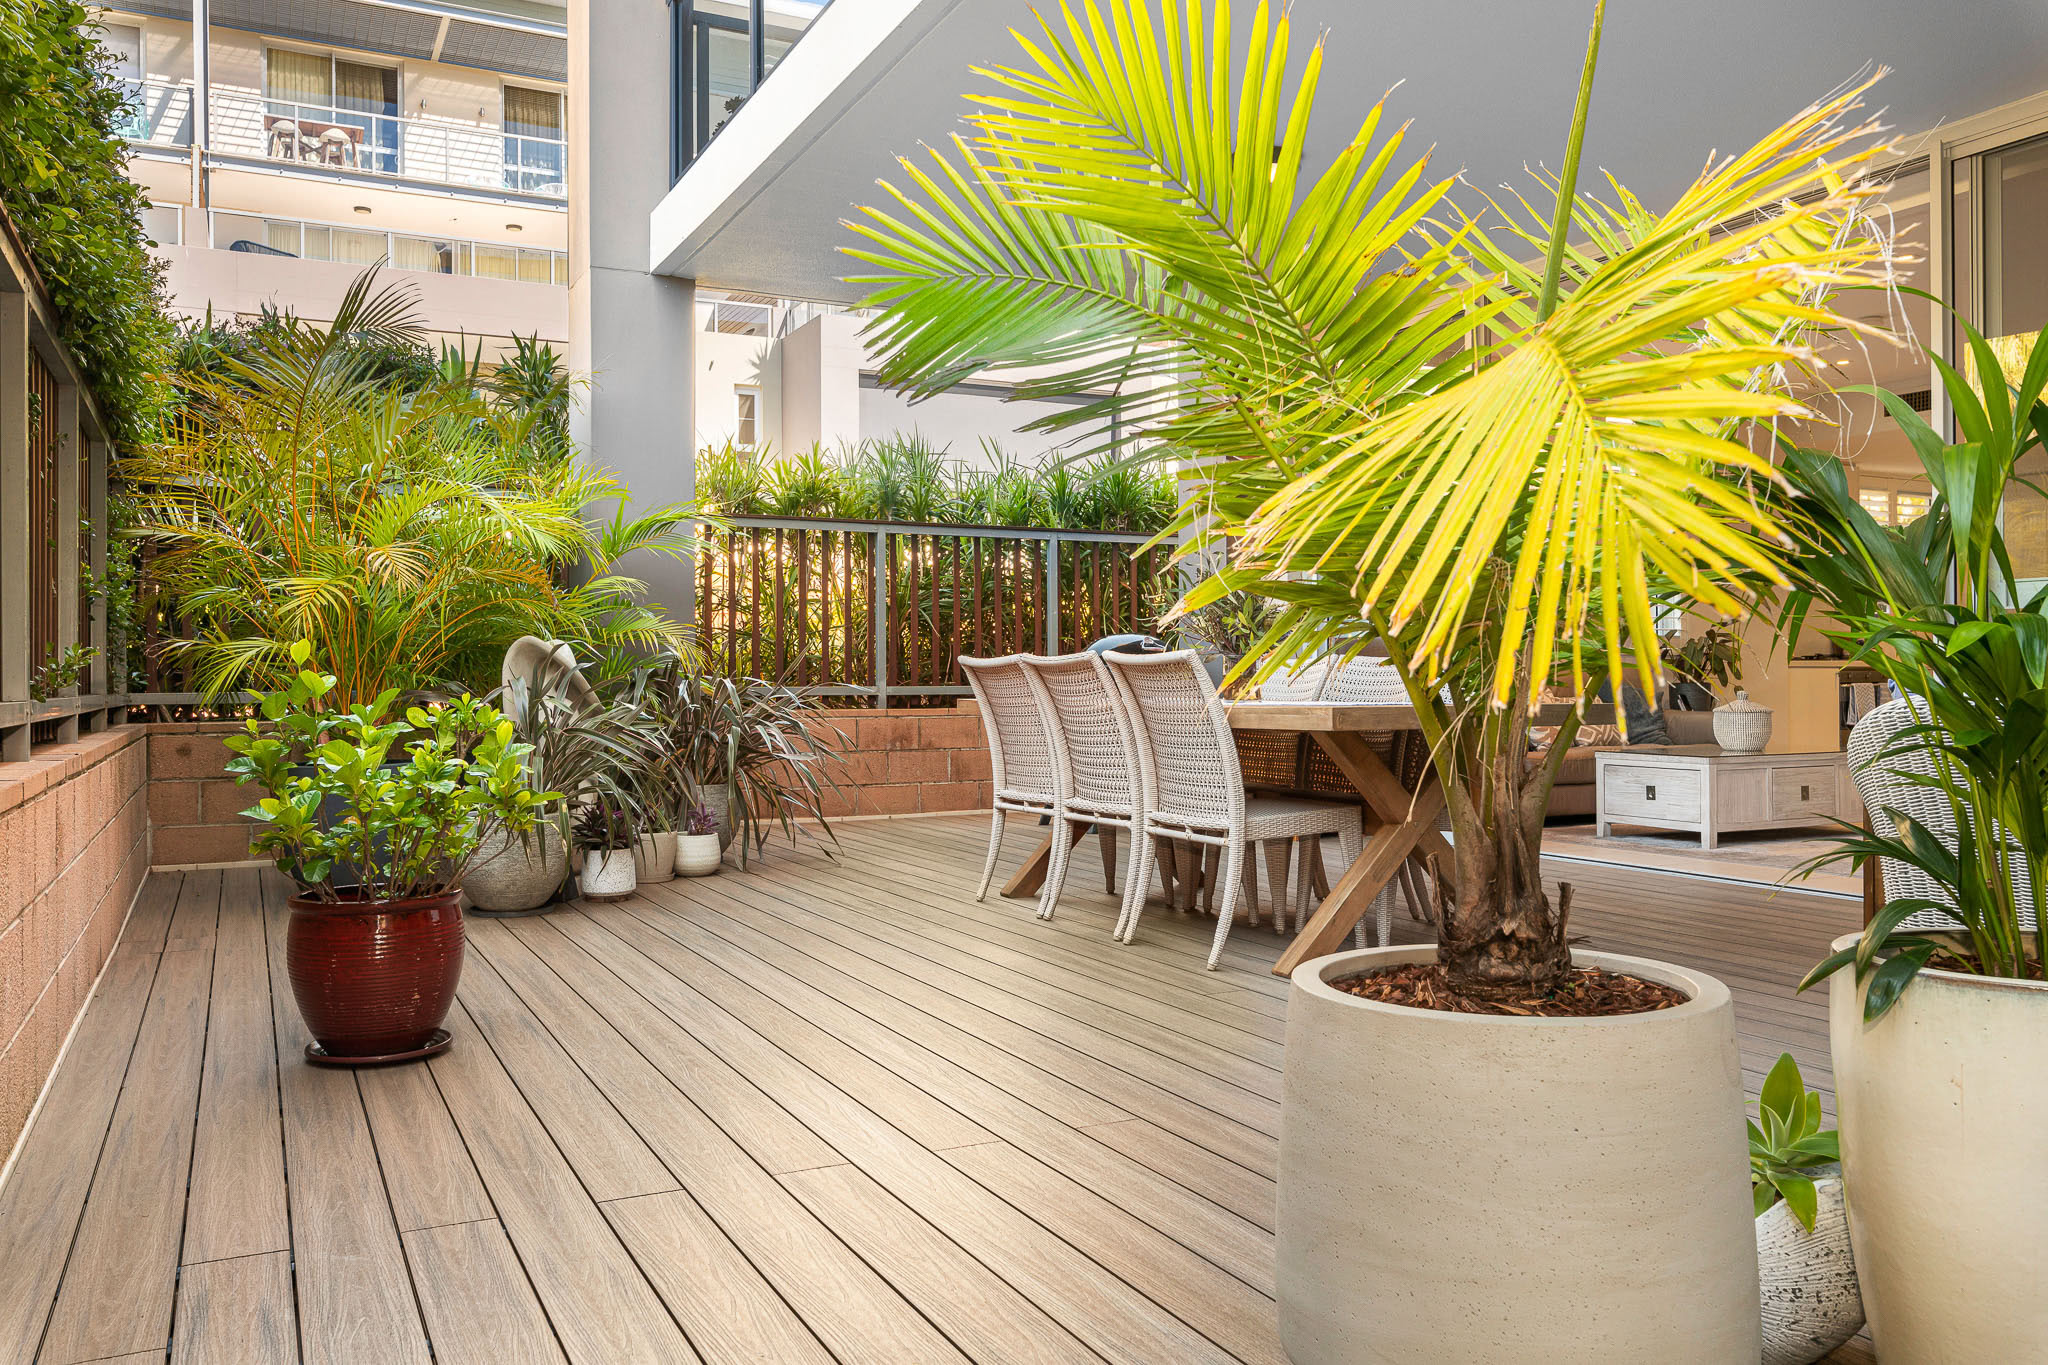 Mountain ash composite decking with large potted plants complimenting the deck's colour